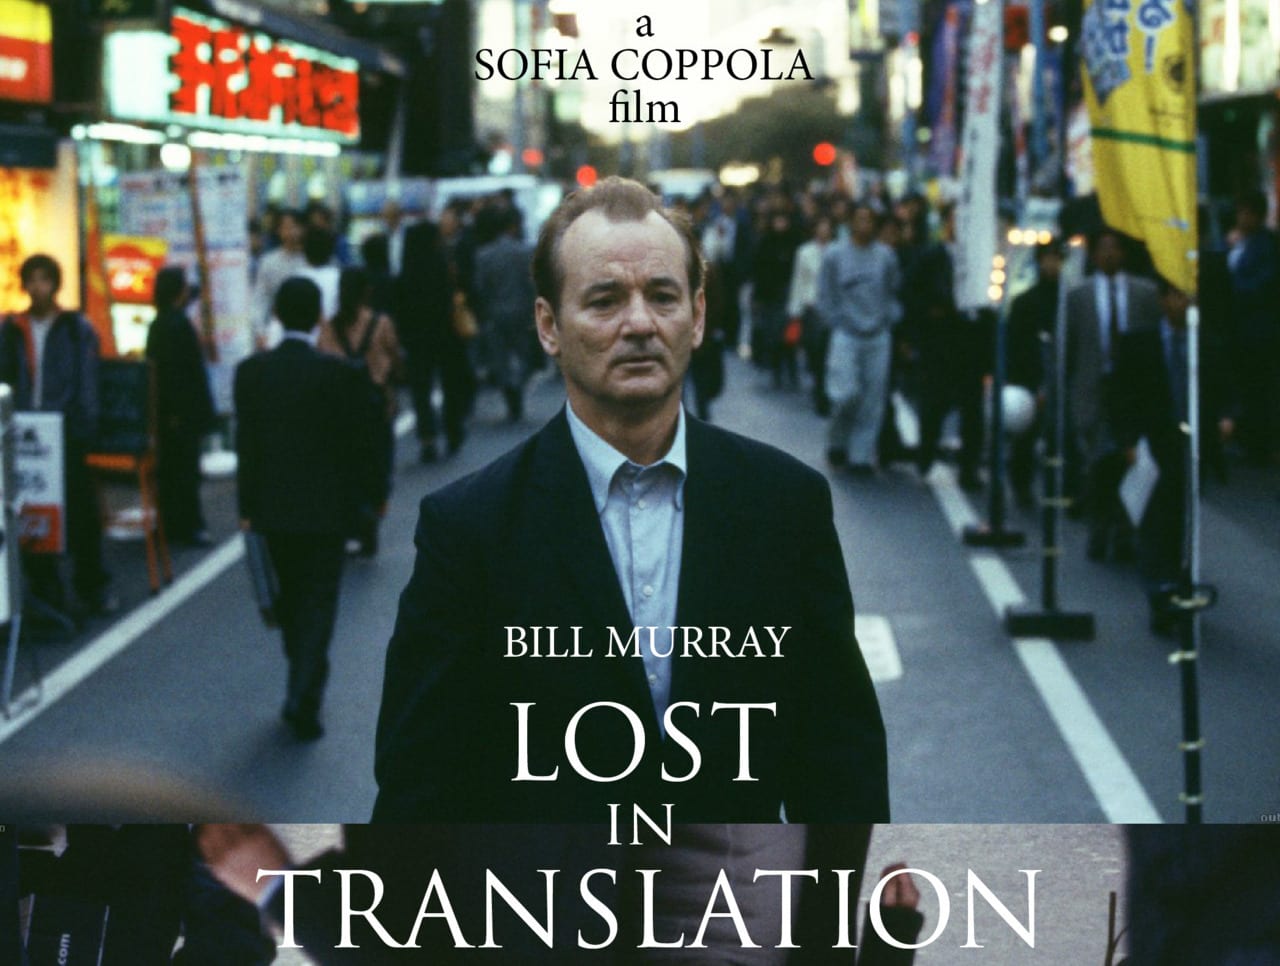 Sofia Coppola and Bill Murray, who scored Oscar noms for Lost in Translation, team up again in Apple TV+ movie On the Rocks.